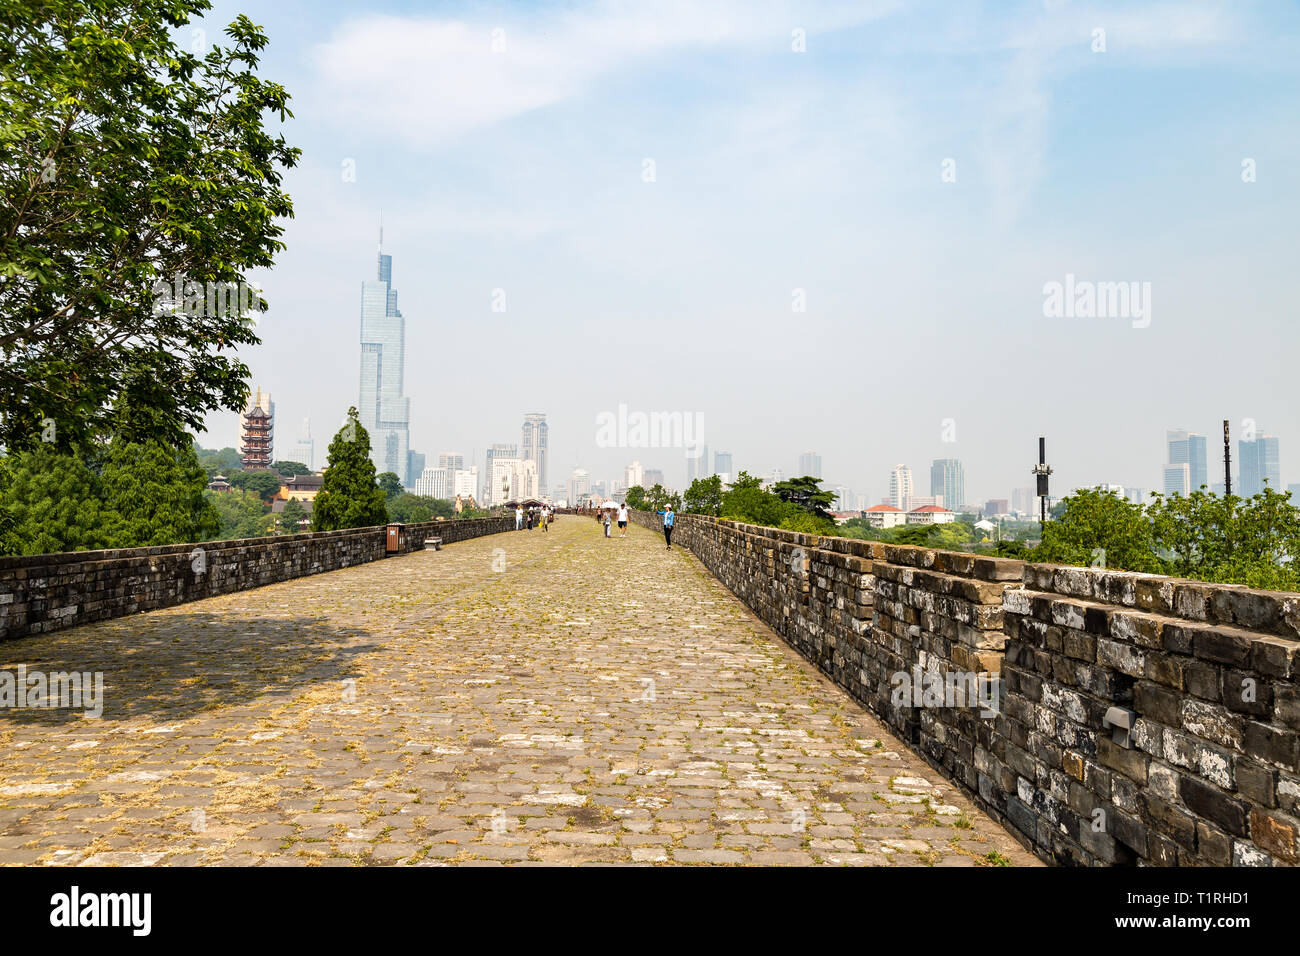 May 2017 - Nanjing, Jiangsu, China - tourists walk on a section of the old Ming Dynasty city walls near Jiming temple. Nanjing skyline is visible in t Stock Photo